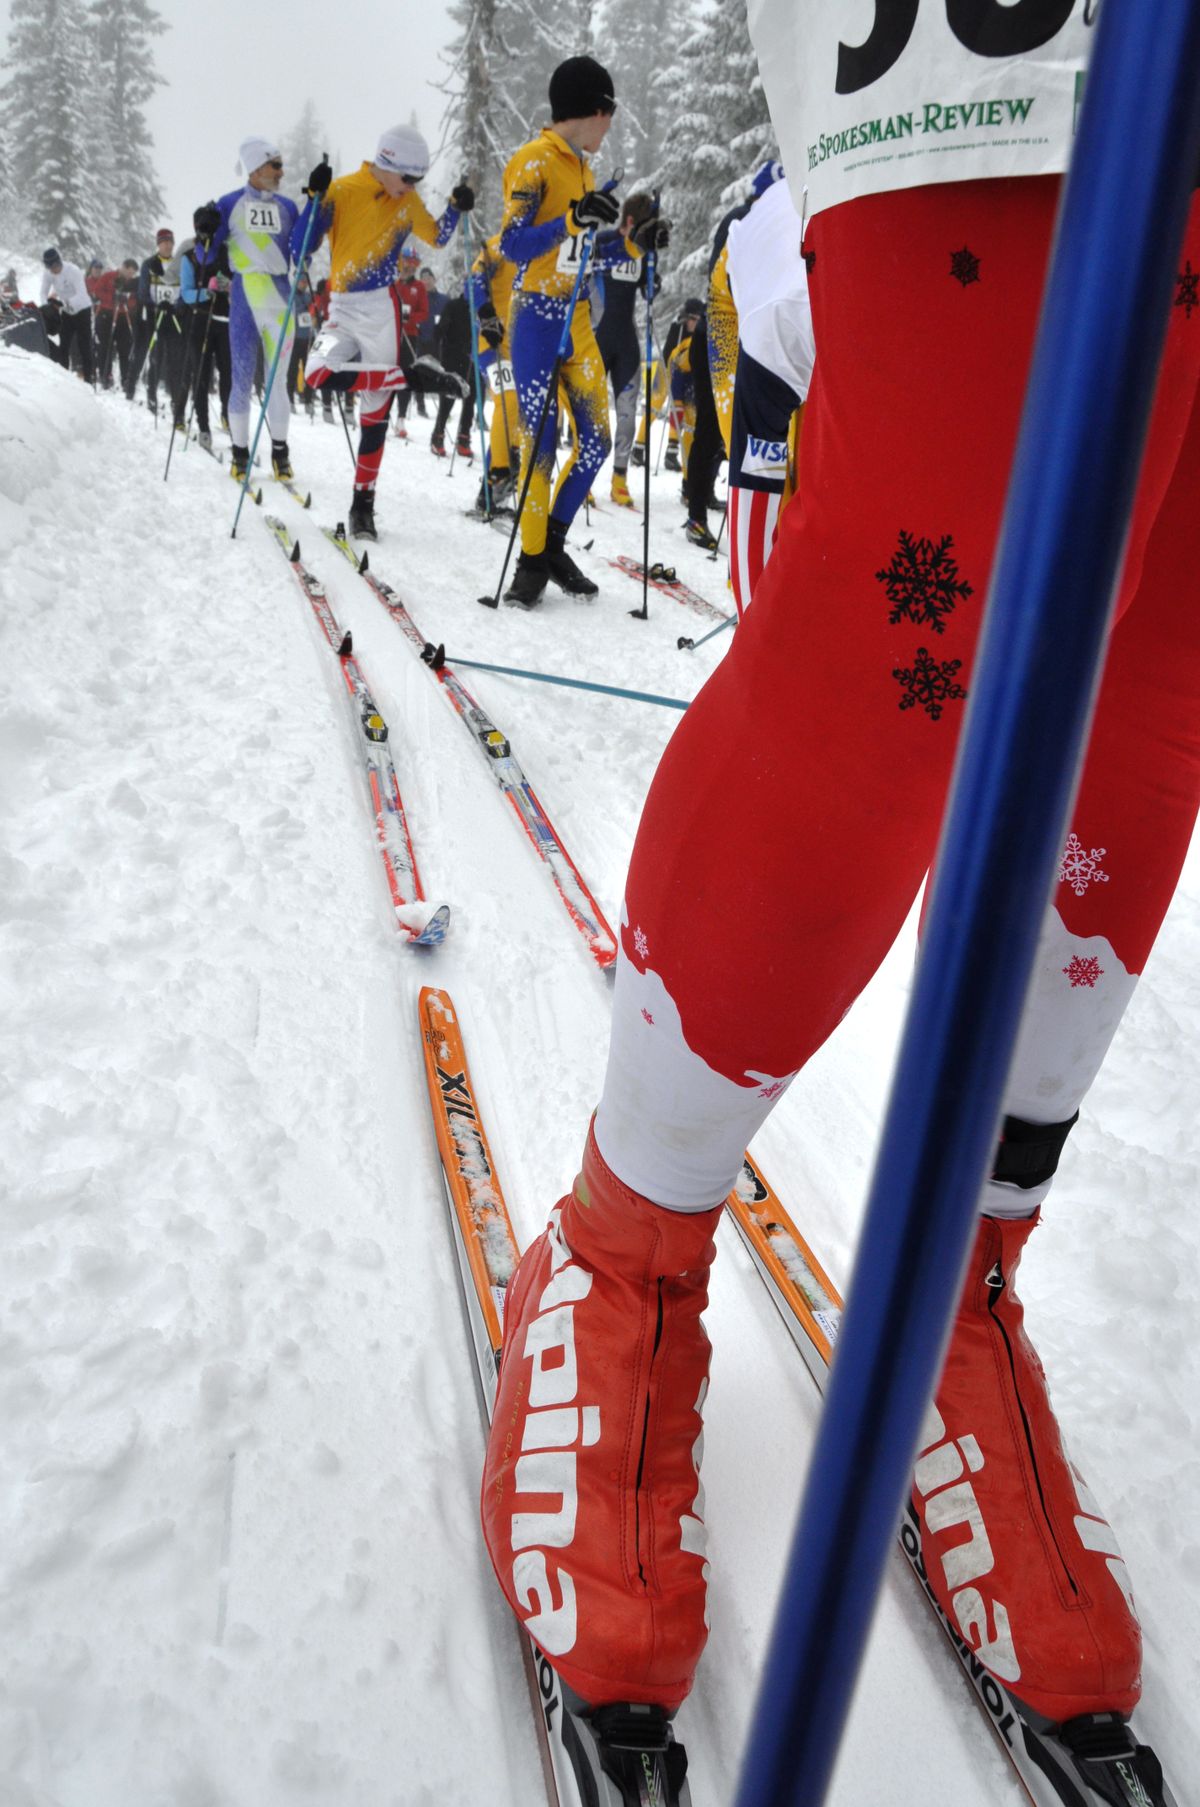 Elite skiers save their sponts before the mass start for 250 competitors in the 34th annual Langlauf 10-kilometer cross-country ski race Sunday at Mount Spokane. The fastest skiers through the foggy conditions were Brad Bauer, 38, of Seattle, the overall winner in 27:33, and Deb Bauer, 46, of Spokane, the top female in 33:01. (Rich Landers)